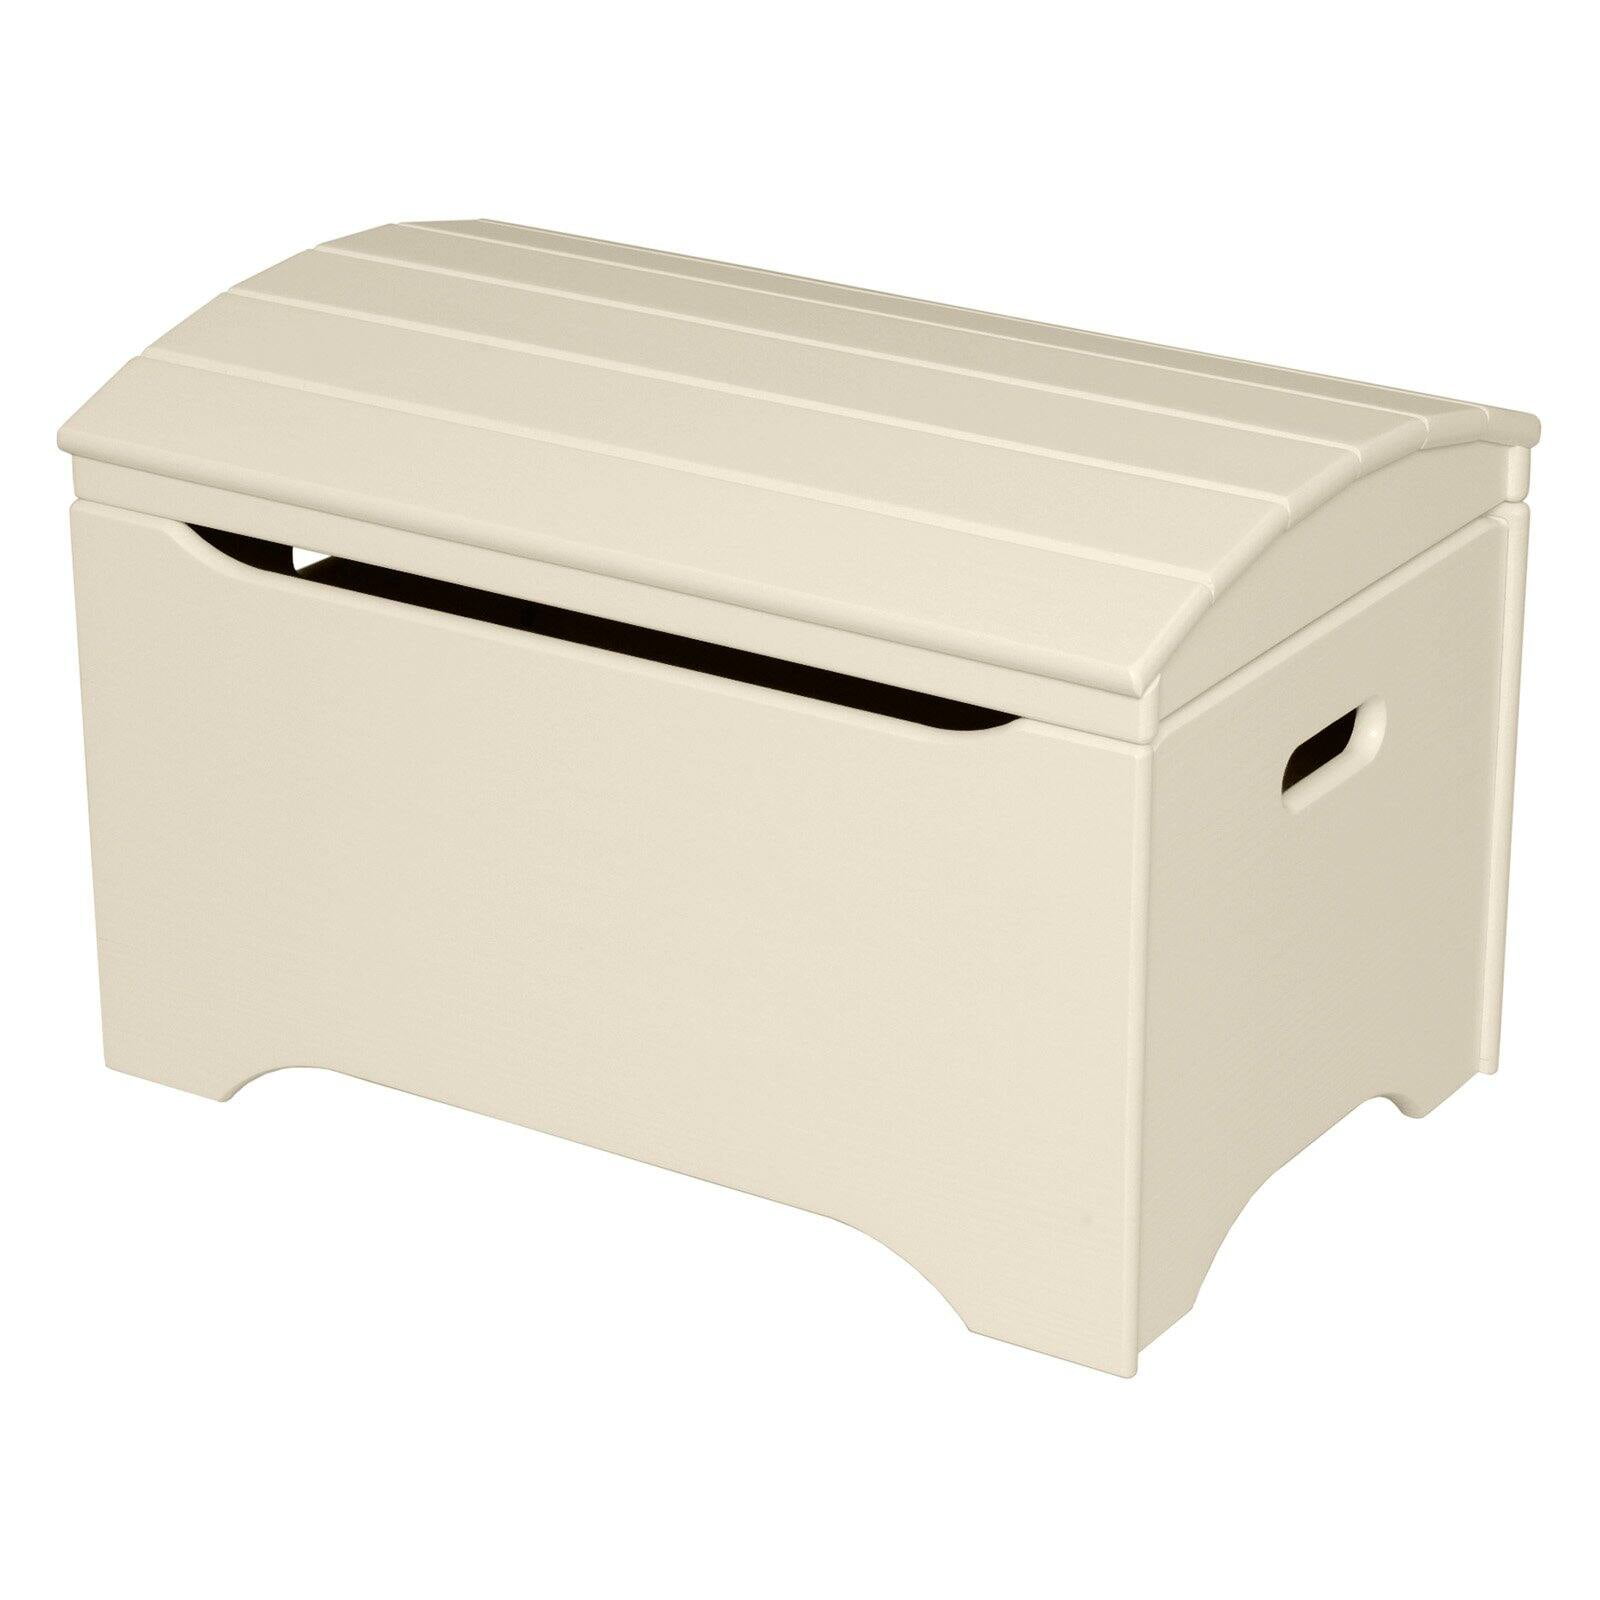 Off-White Toy Chests - Walmart.com